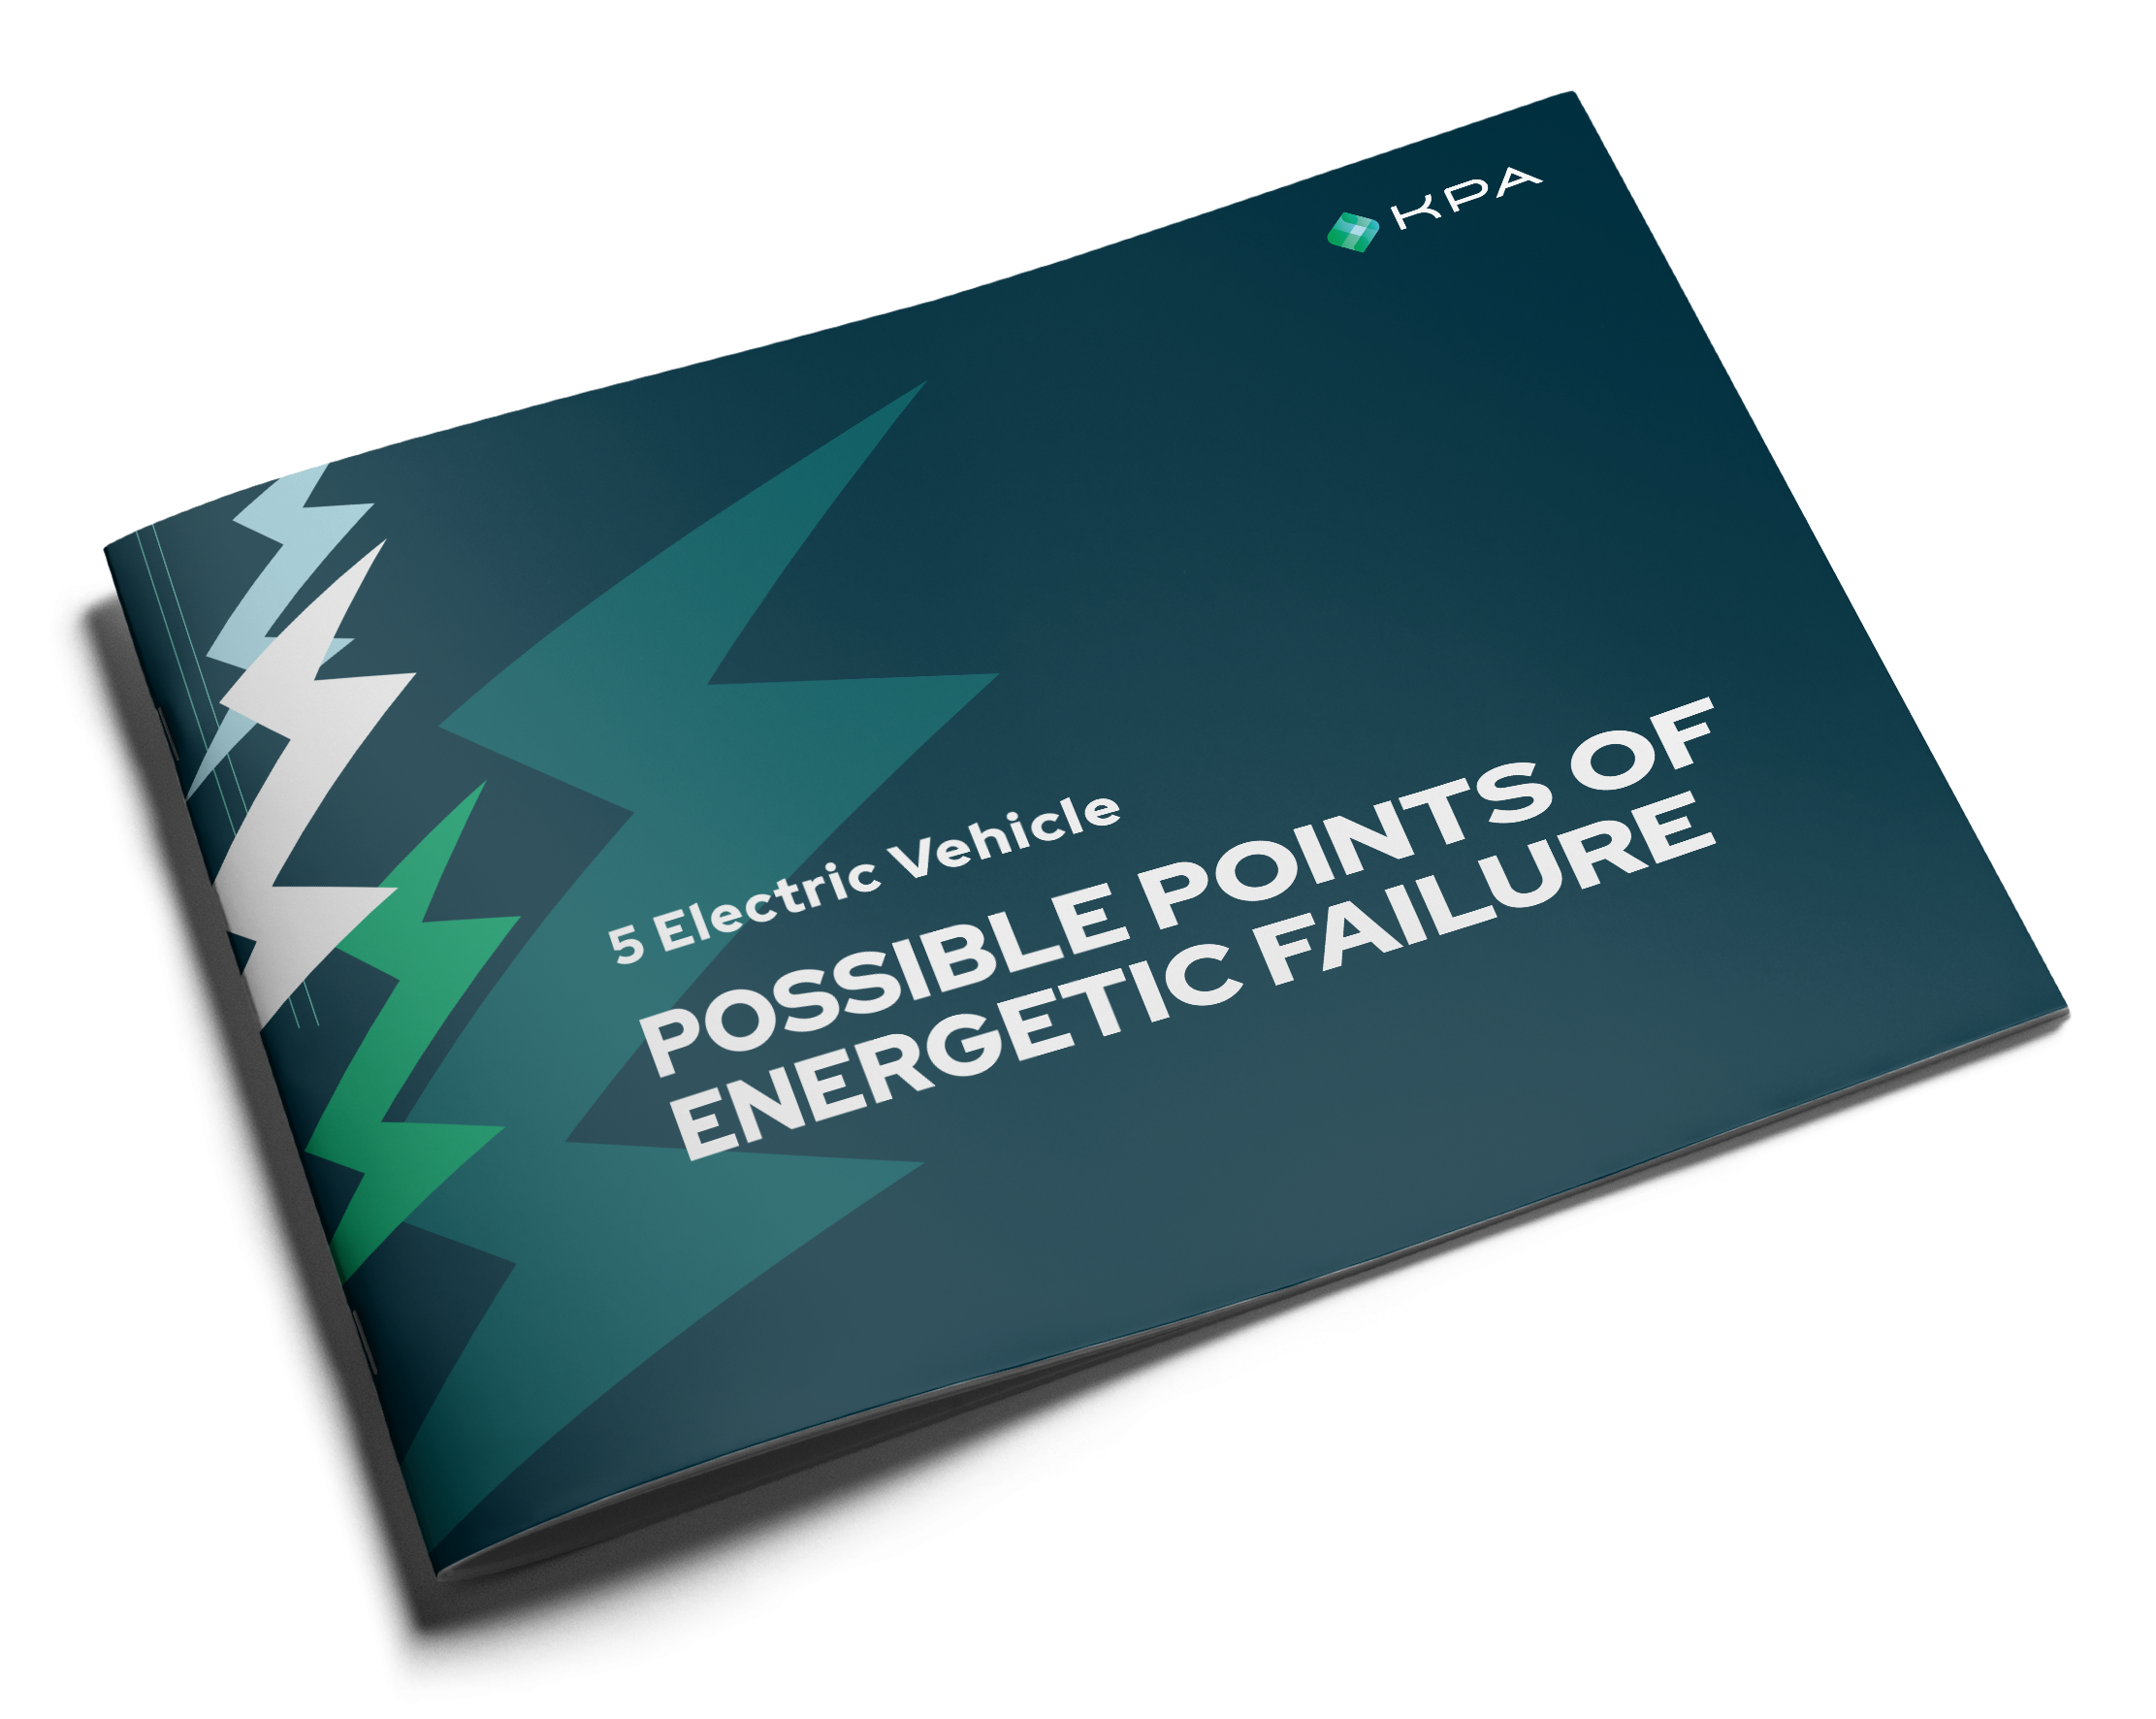 5 EV Possible Points of Energetic Failure - Infographic